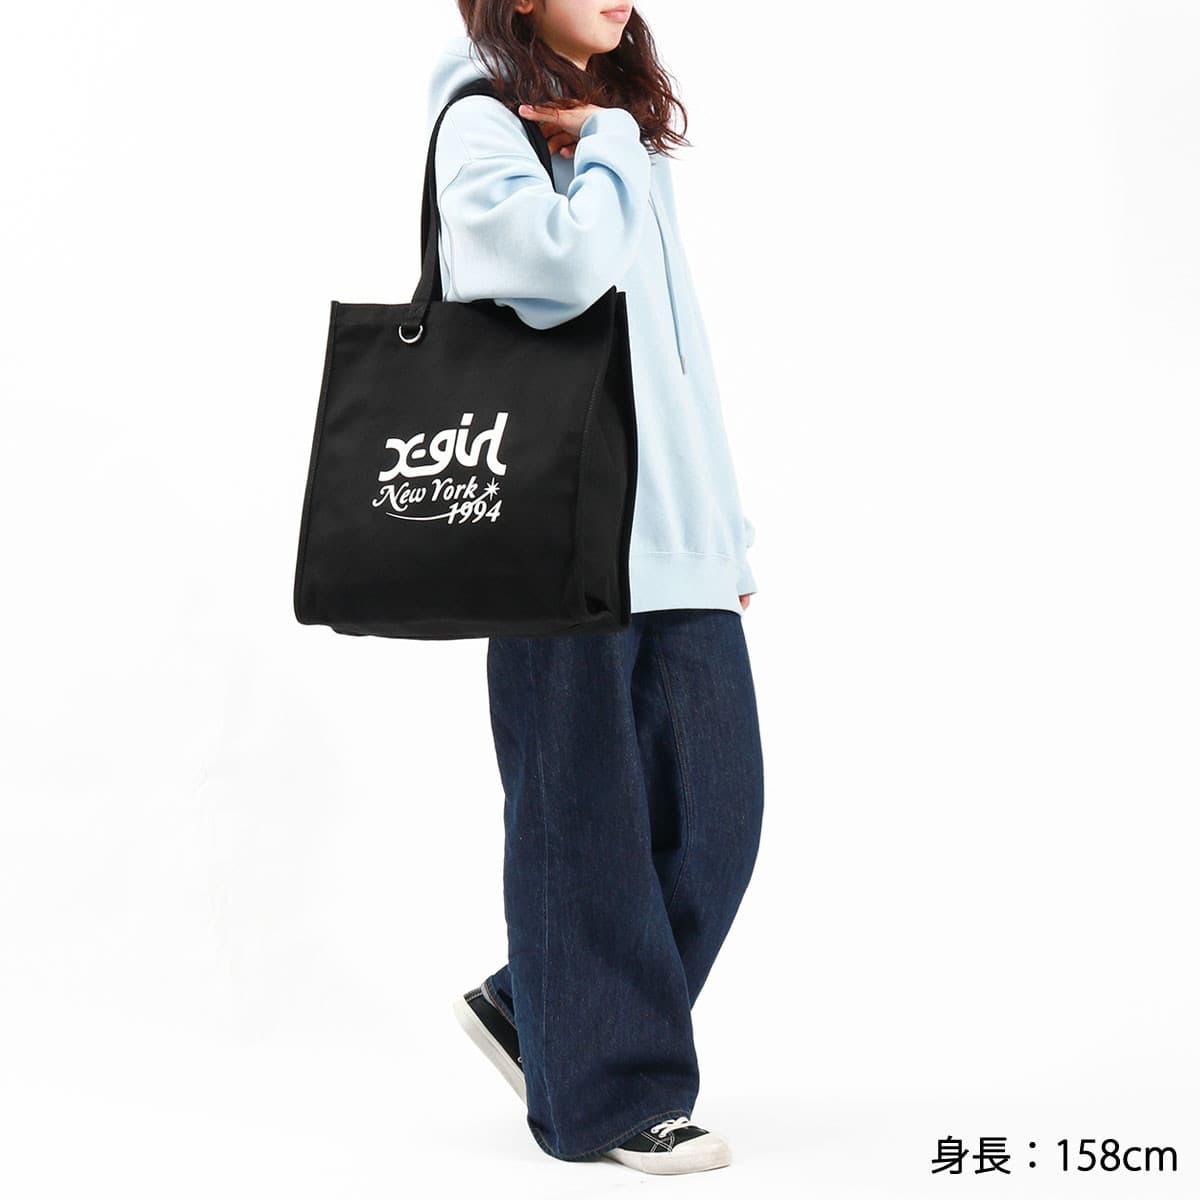 X-girl エックスガール NEW YORK CANVAS TOTE BAG トートバッグ 